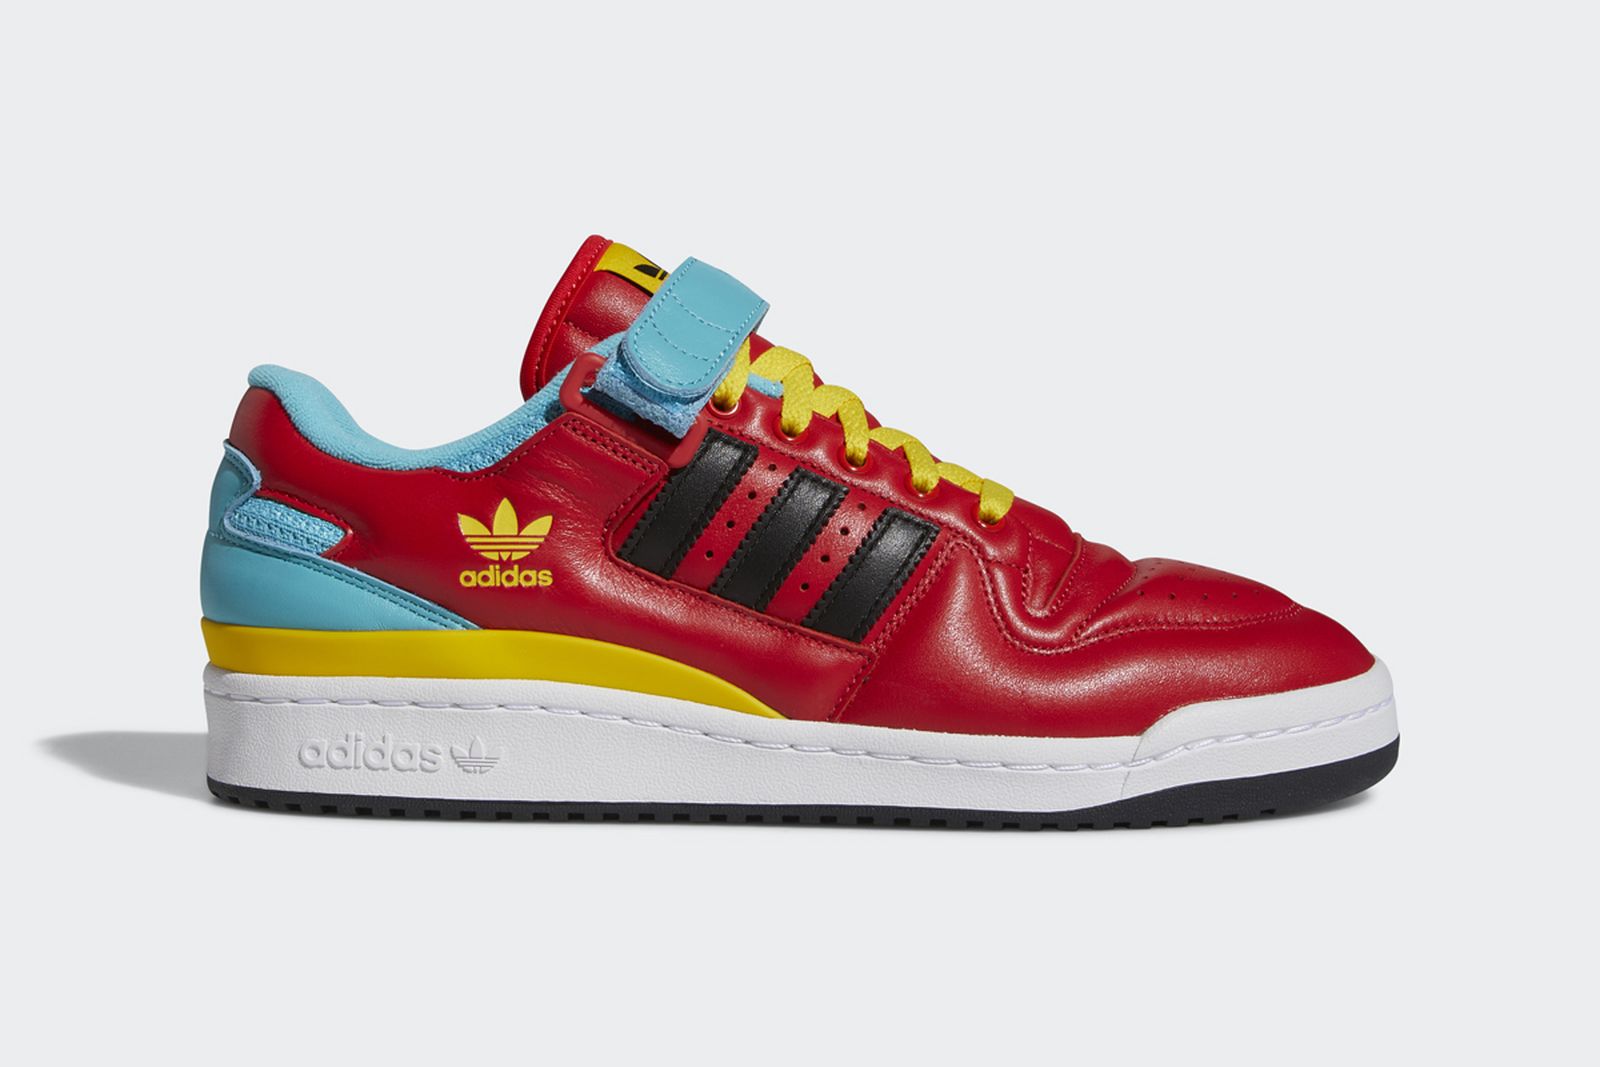 south-park-adidas-shoes-release-date-collection (13)